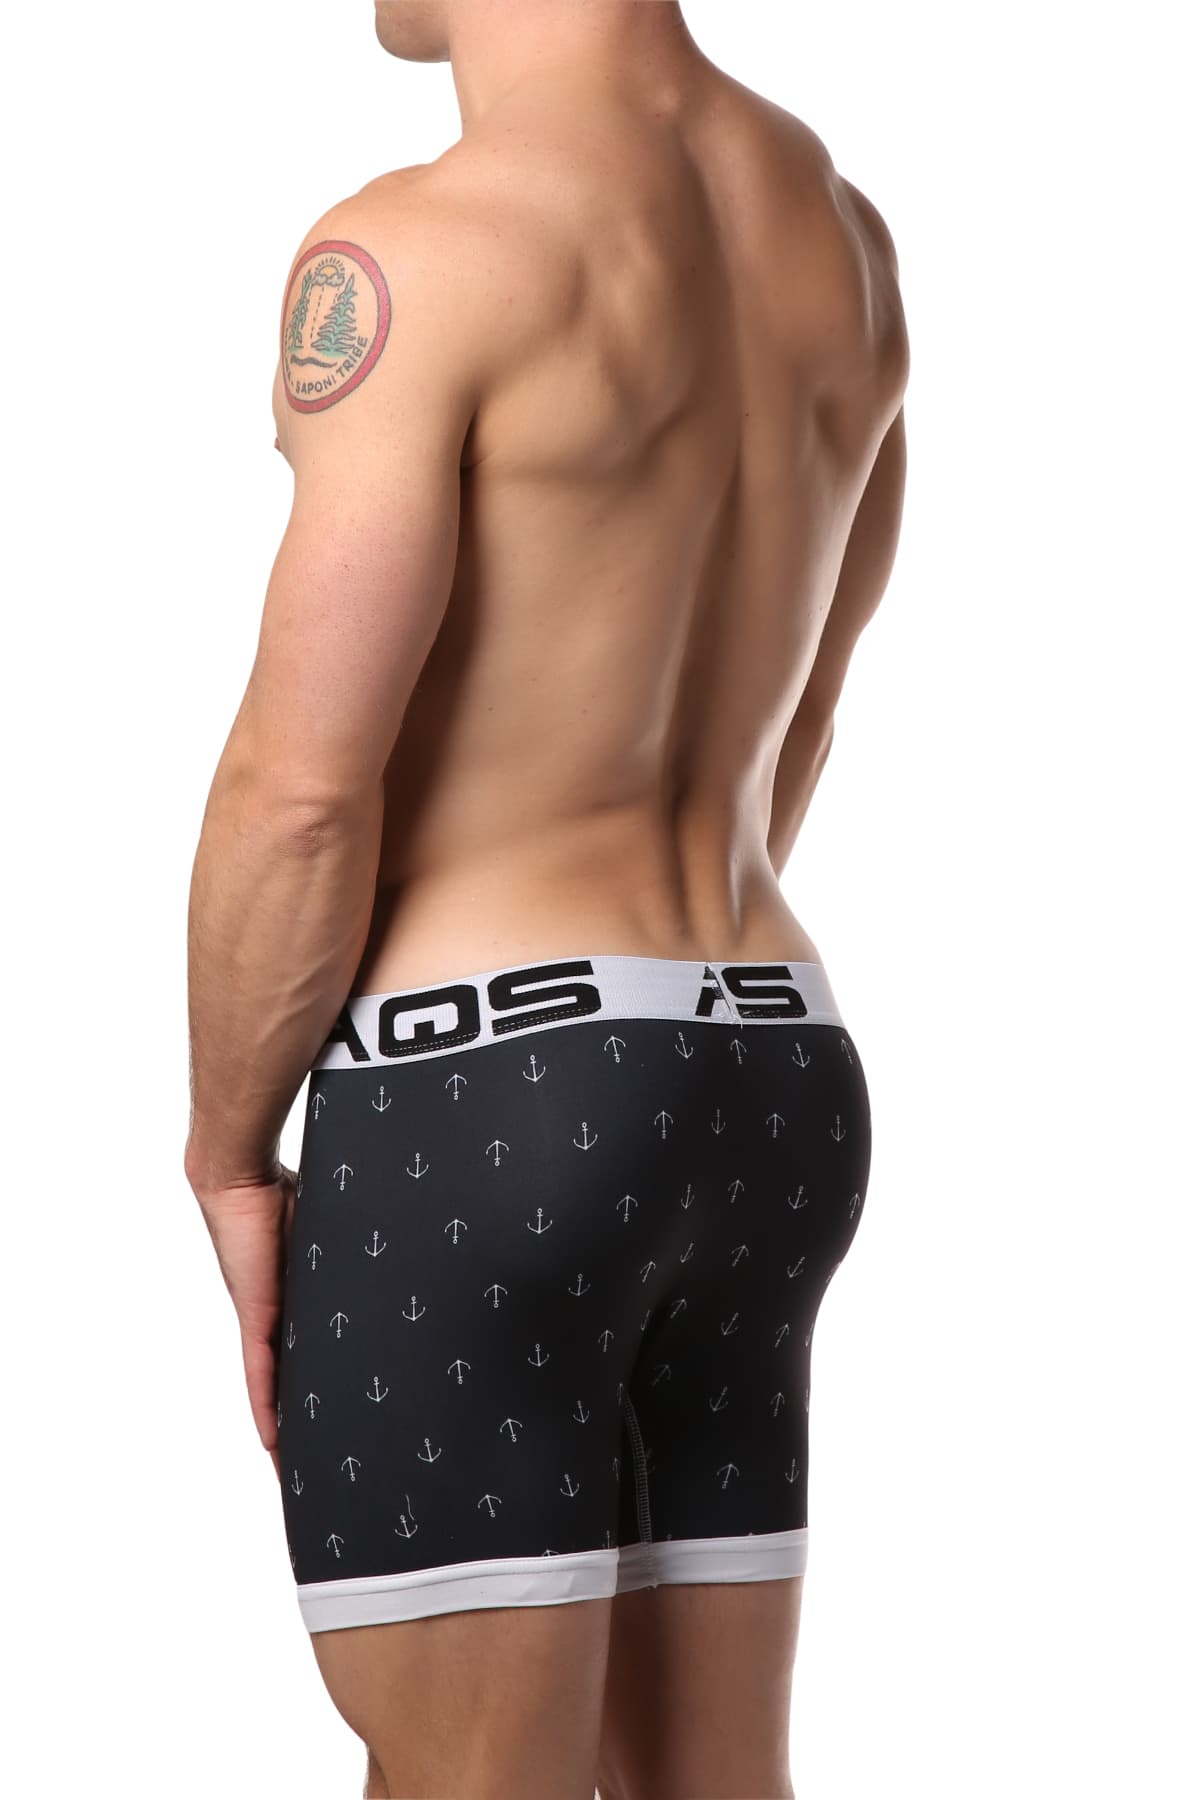 AQS Black/Red Anchor Printed Boxer Brief 3-Pack